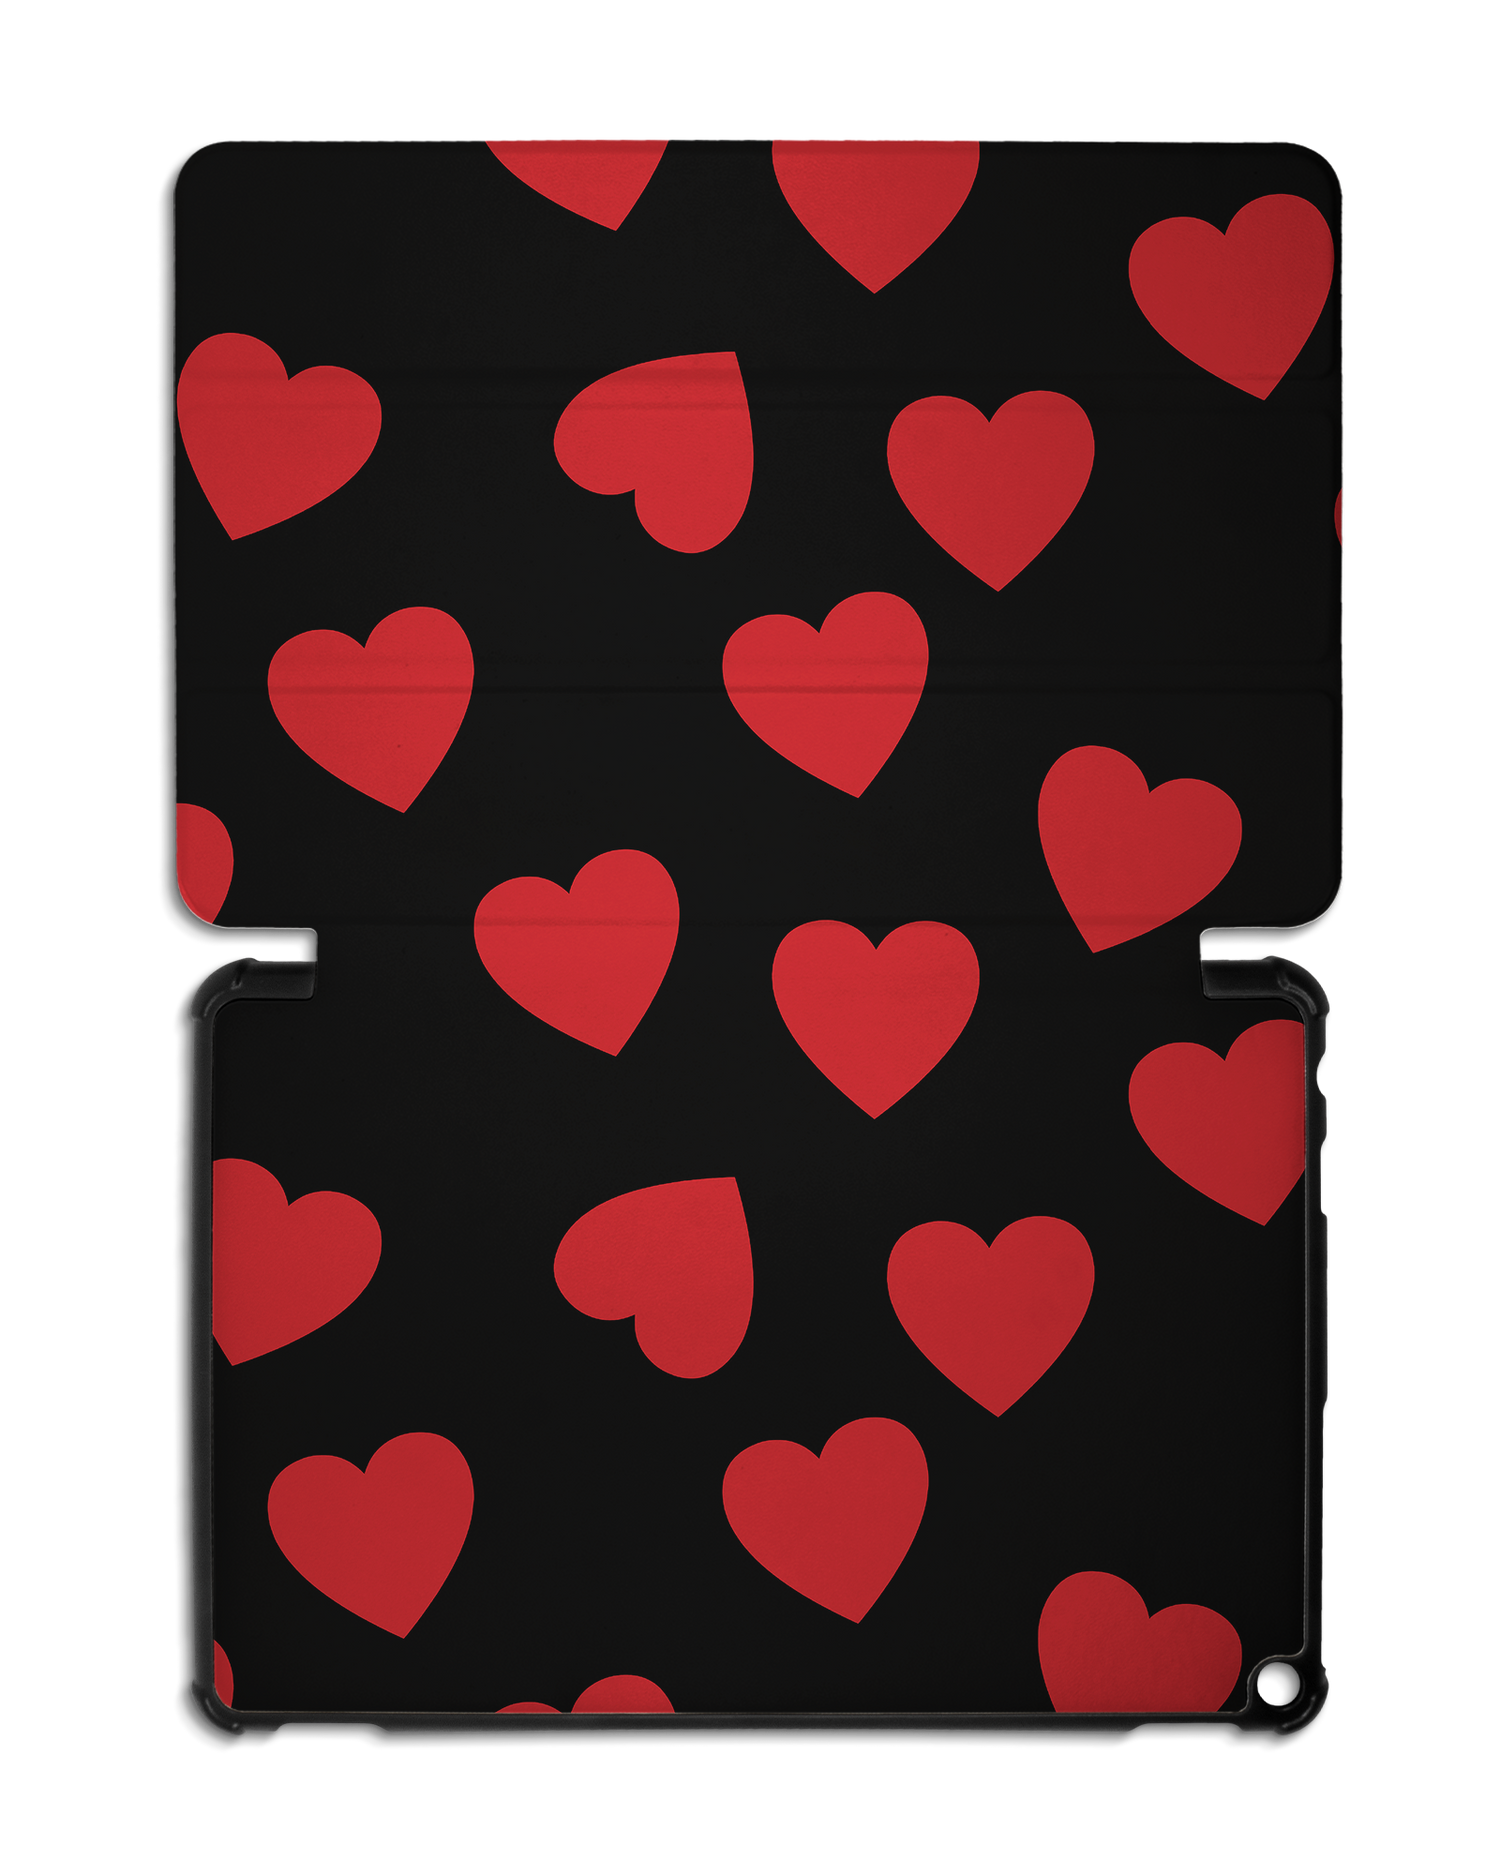 Repeating Hearts Tablet Smart Case for Amazon Fire HD 10 (2021): Opened